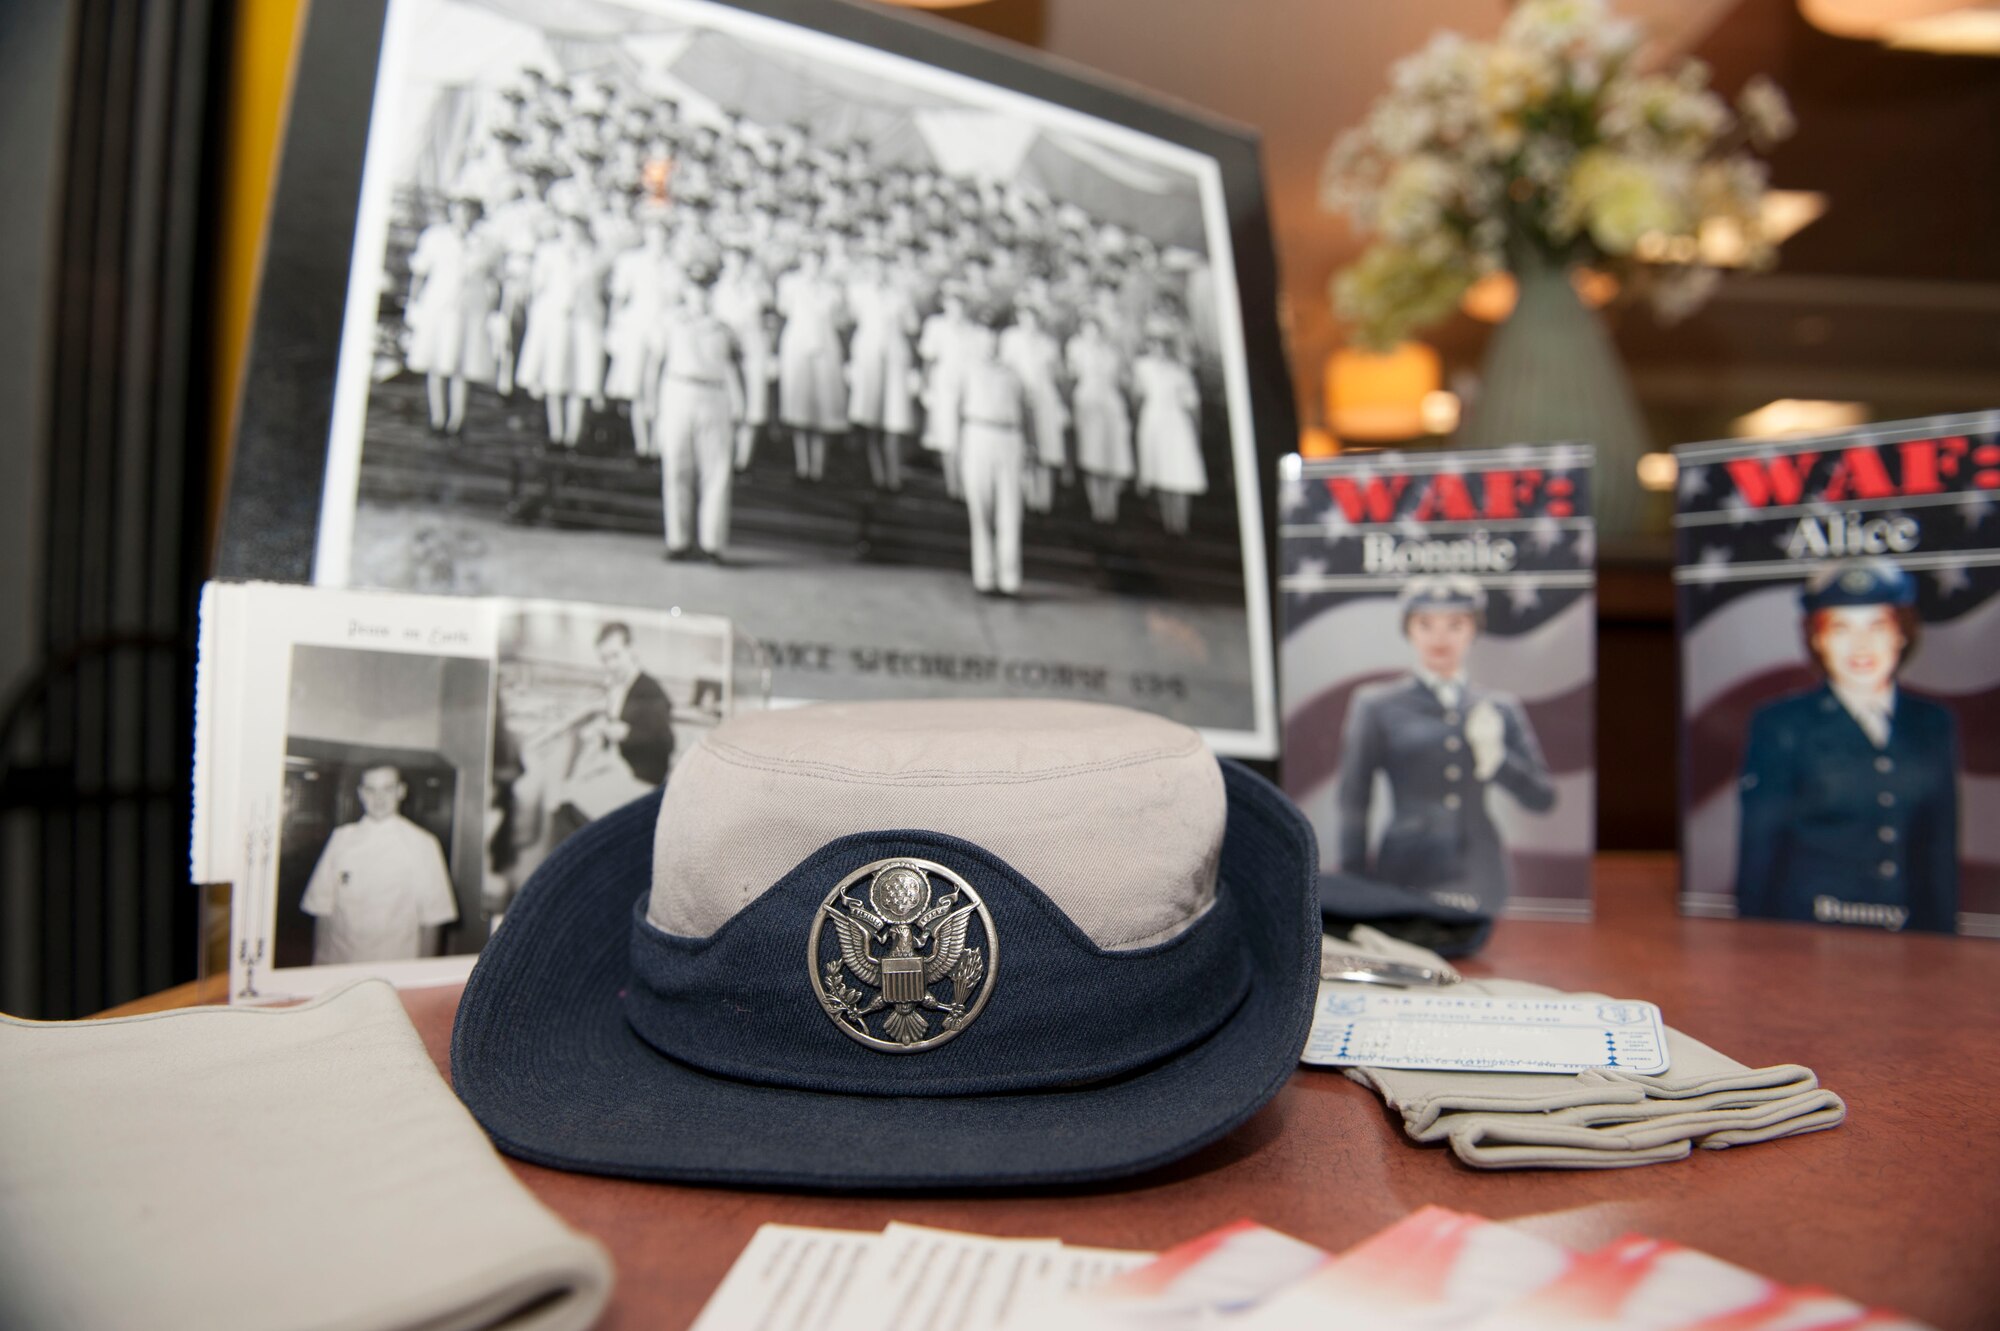 U.S. Air Force items from the 1960’s are displayed during a Women’s Equality Day presentation Aug. 26, 2014, on Buckley Air Force Base, Colo. Women’s Equality Day commemorates the ratification of the 19th Amendment, granting women the right to vote. Today, it is celebrated in honor of modern day women’s rights to be seen as equals to men. (U.S. Air Force photo by Airman 1st Class Samantha Saulsbury/Released)